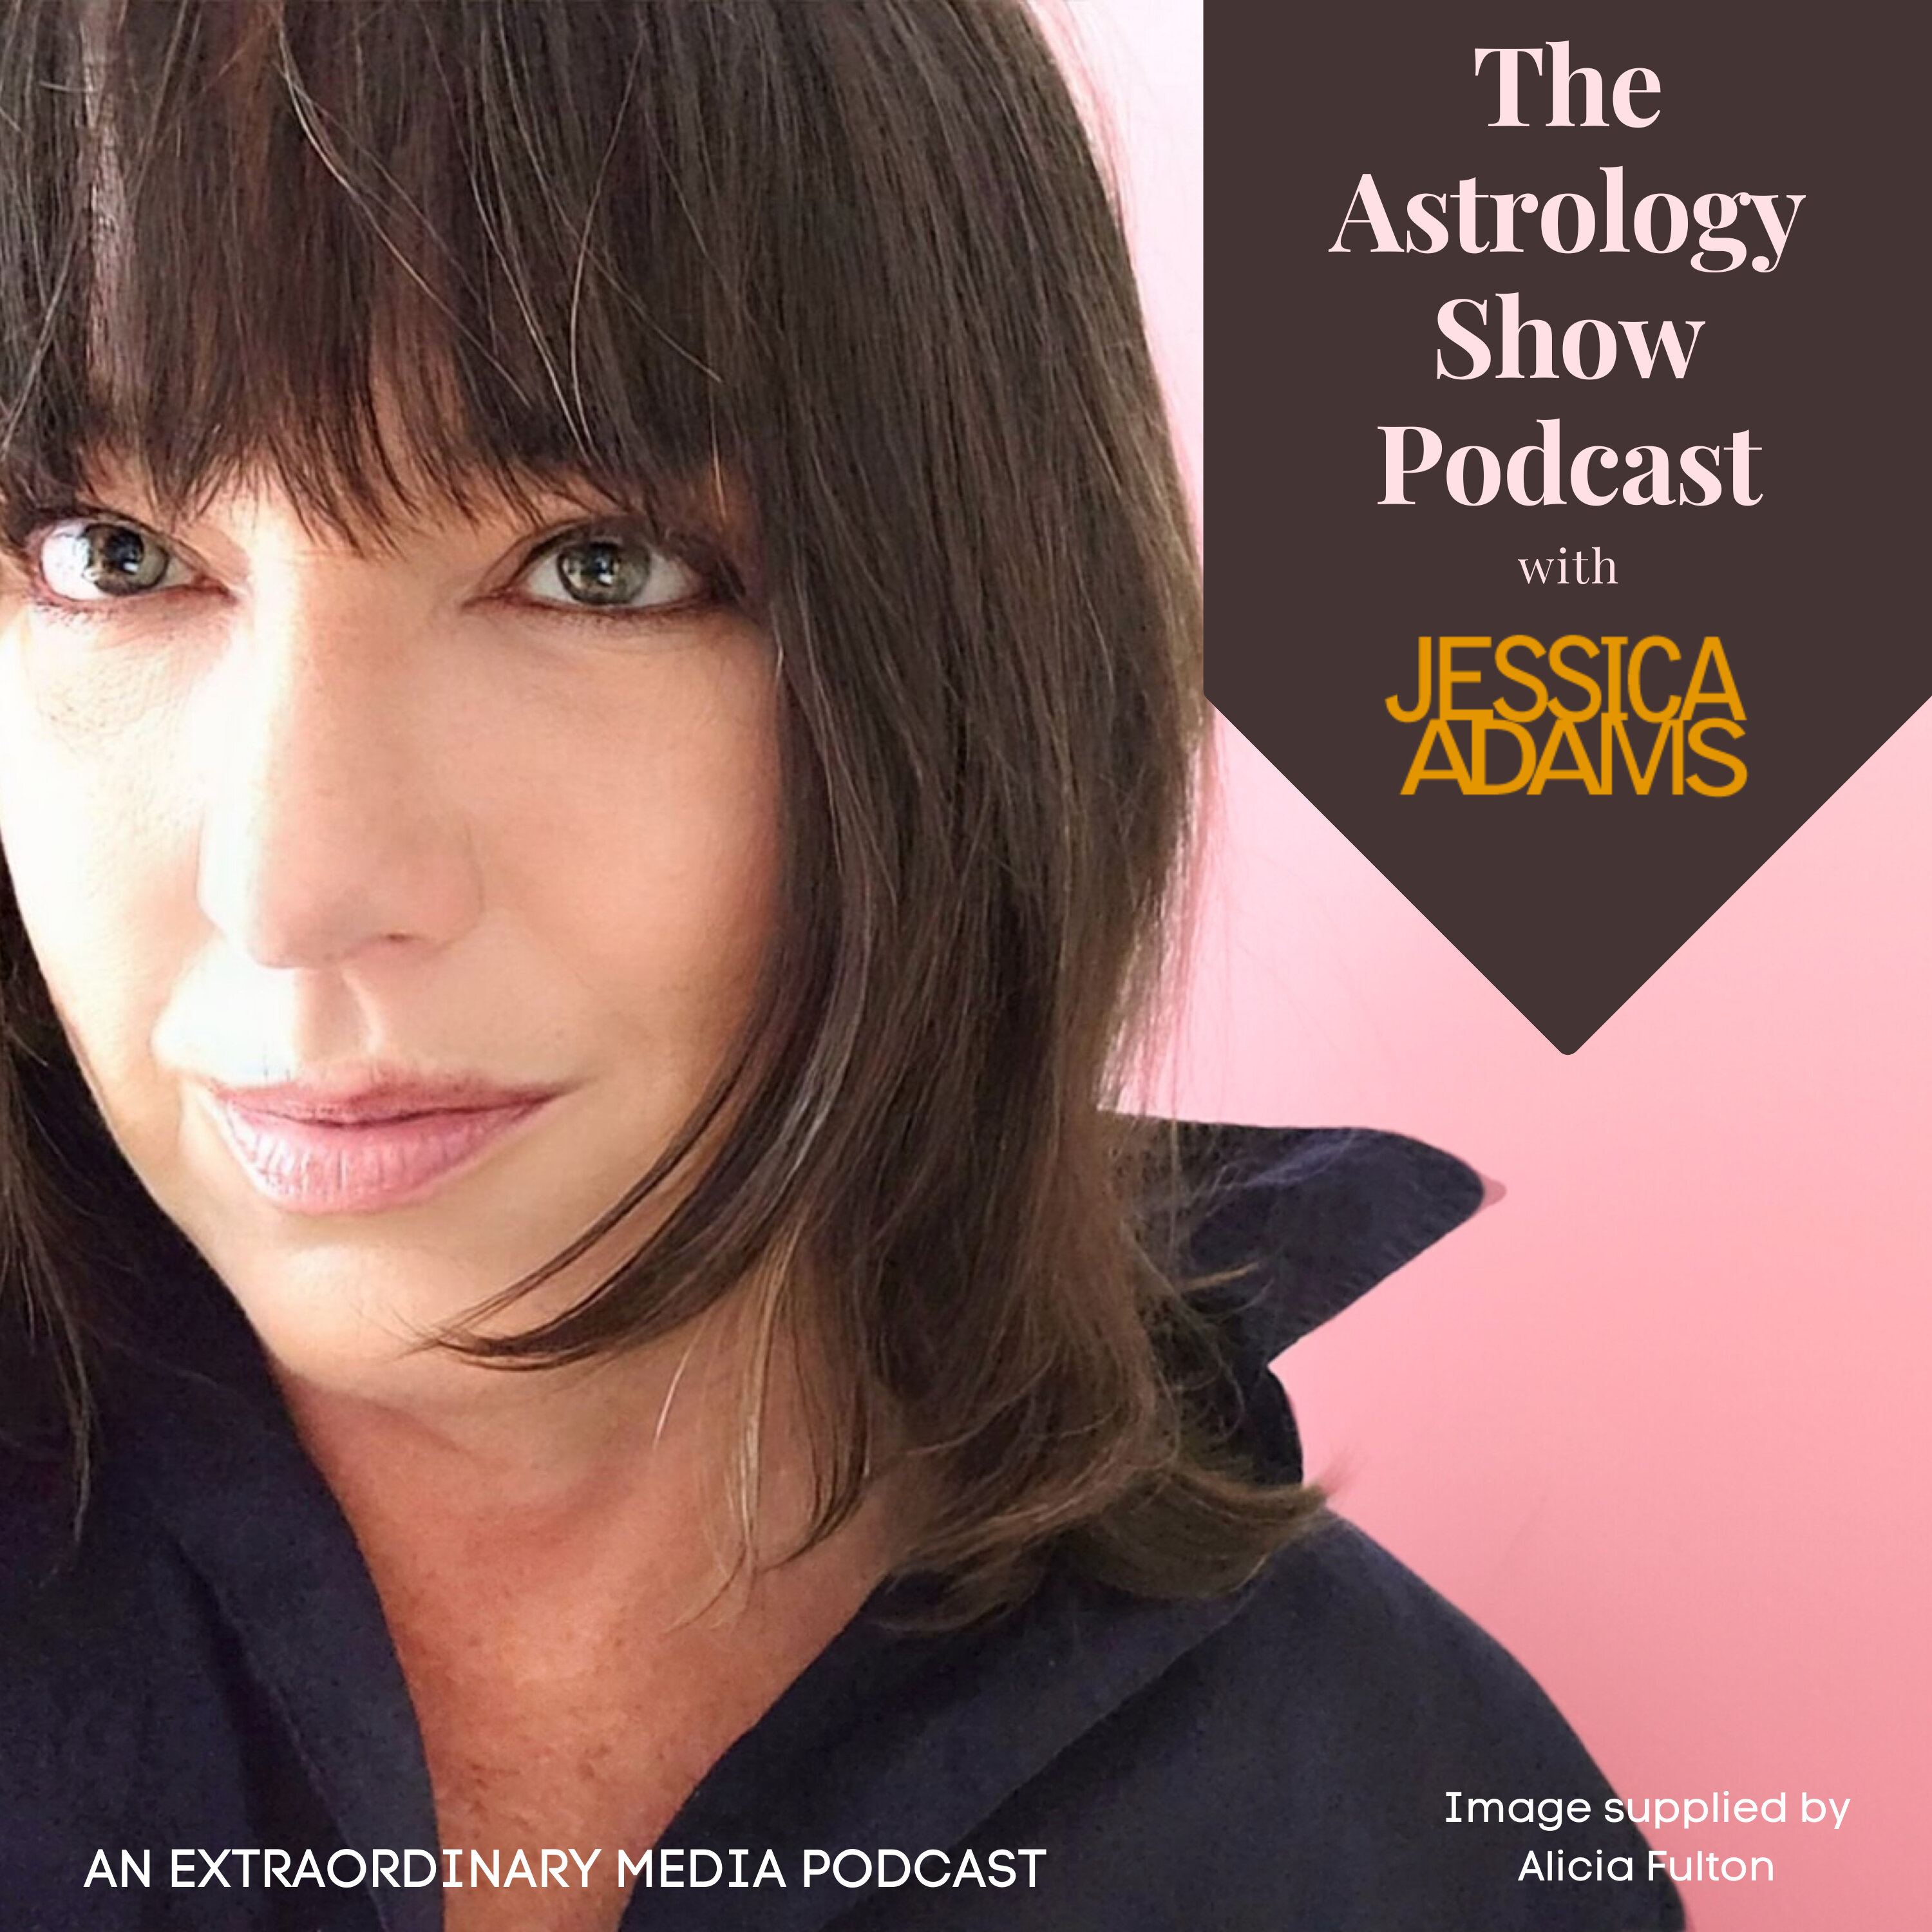 The Astrology Show Podcast with Jessica Adams podcast show image